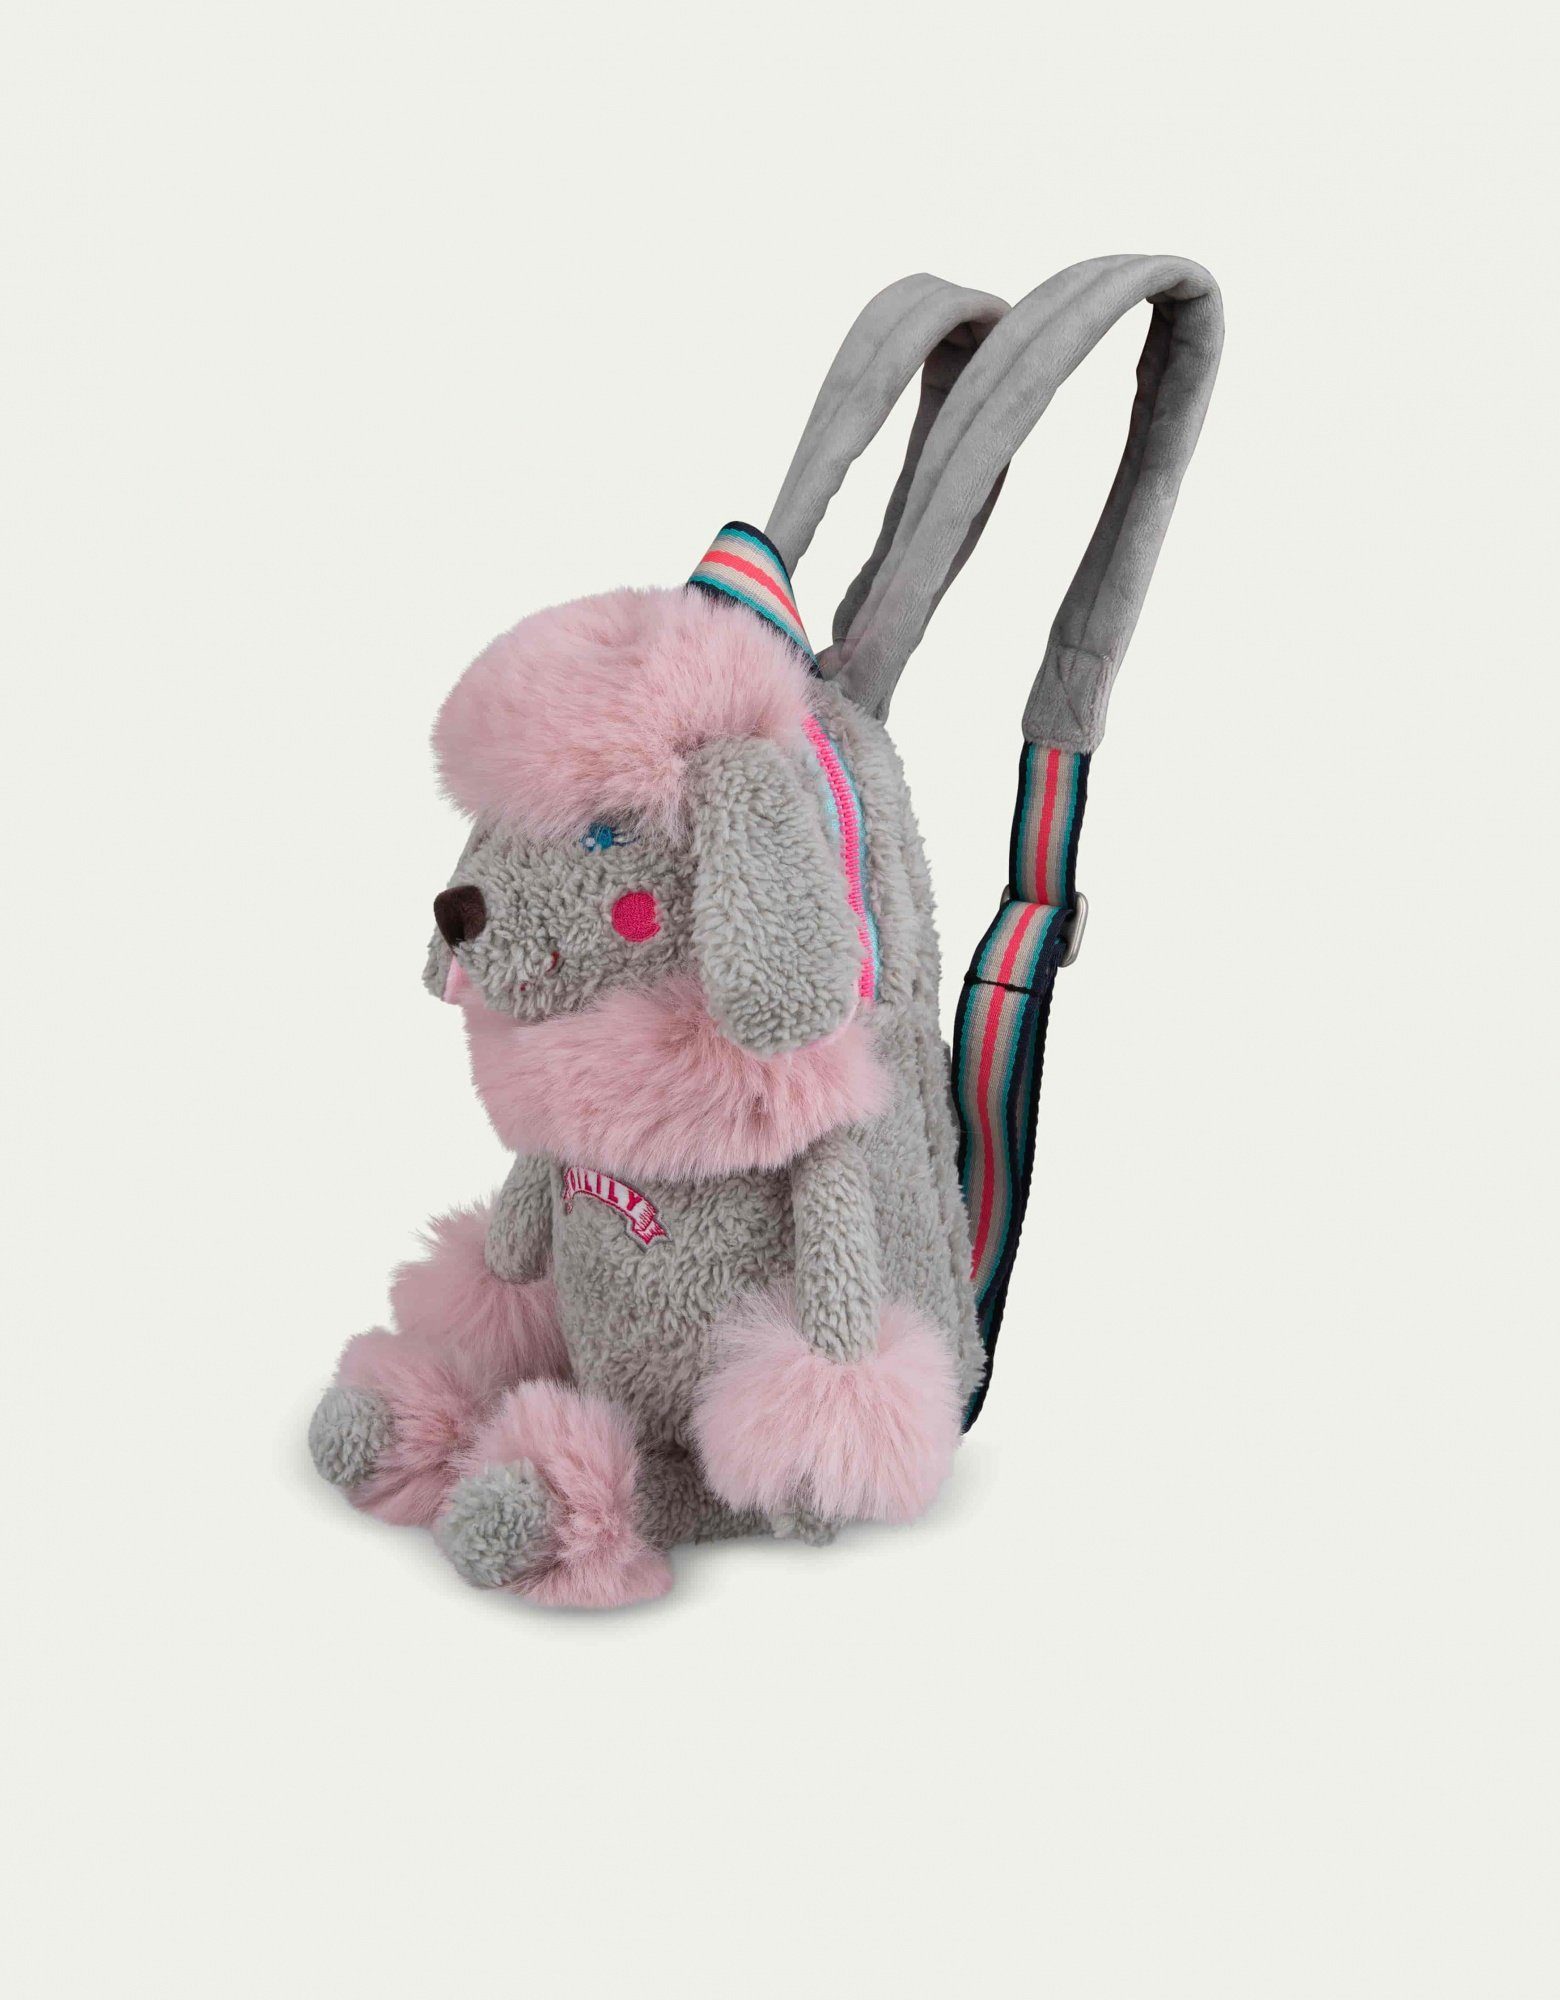 Rucksack Poodle Backpack Oilily The Softies